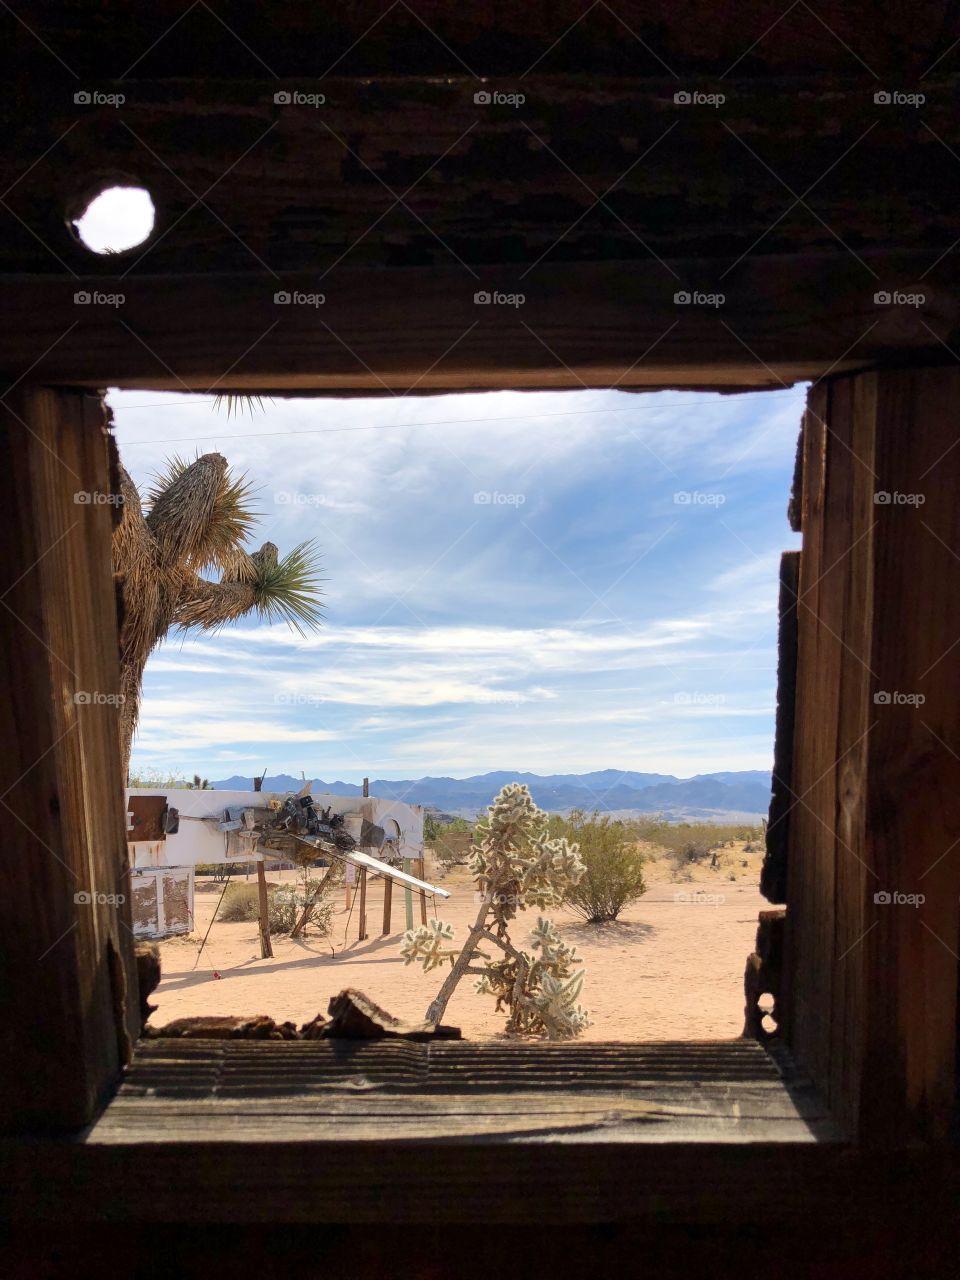 In Joshua Tree at the Noah Purifoy outdoor museum. Peering through a tiny window in a wooden shack. 